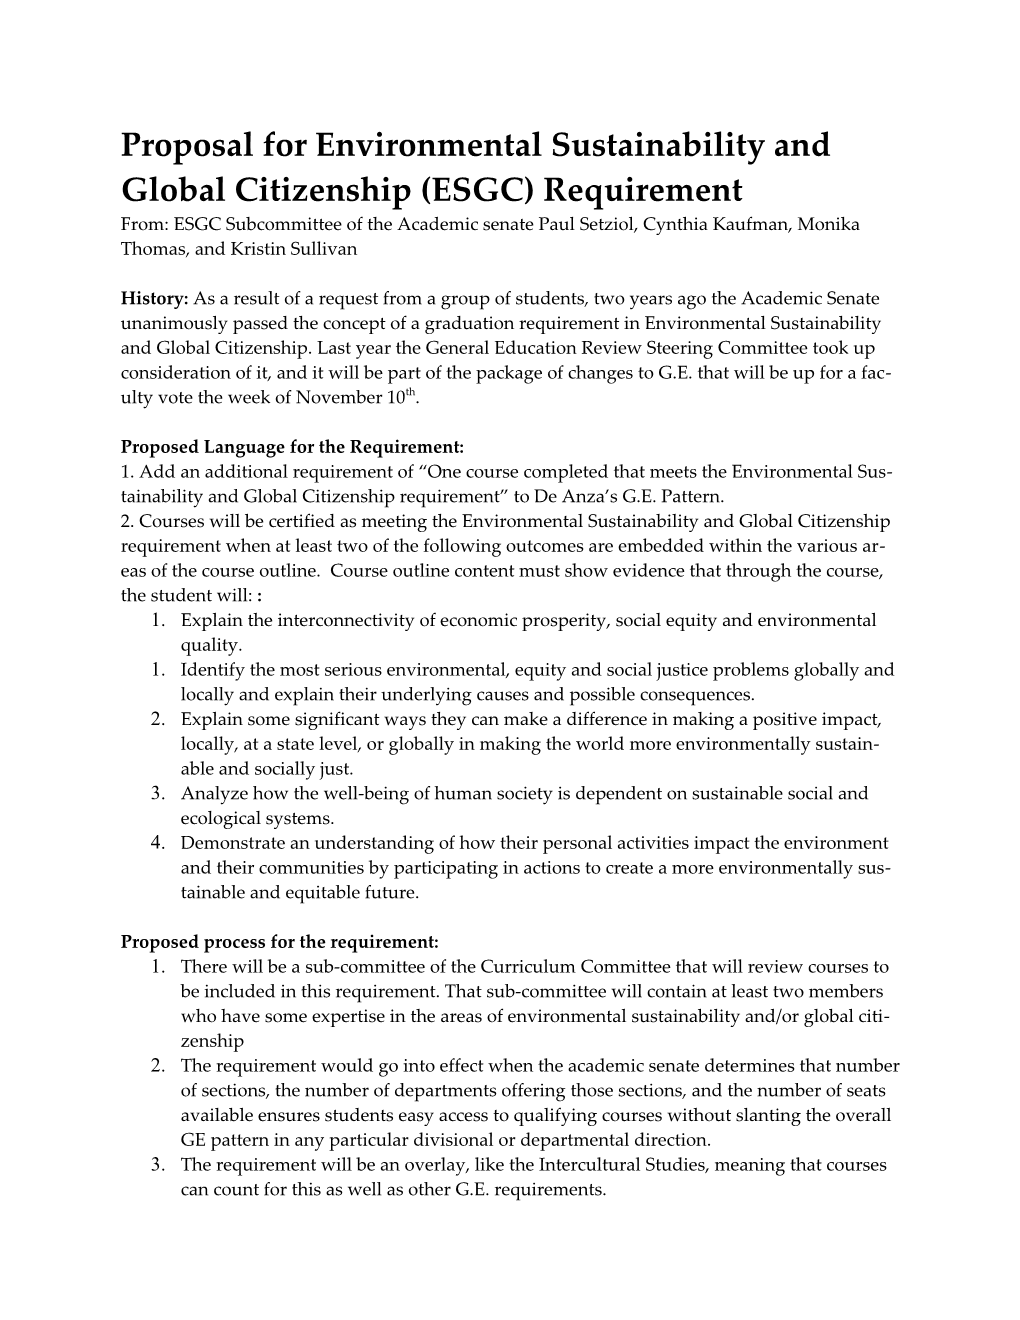 Proposal for Sustainability and Global Citizenship Requirement for De Anza